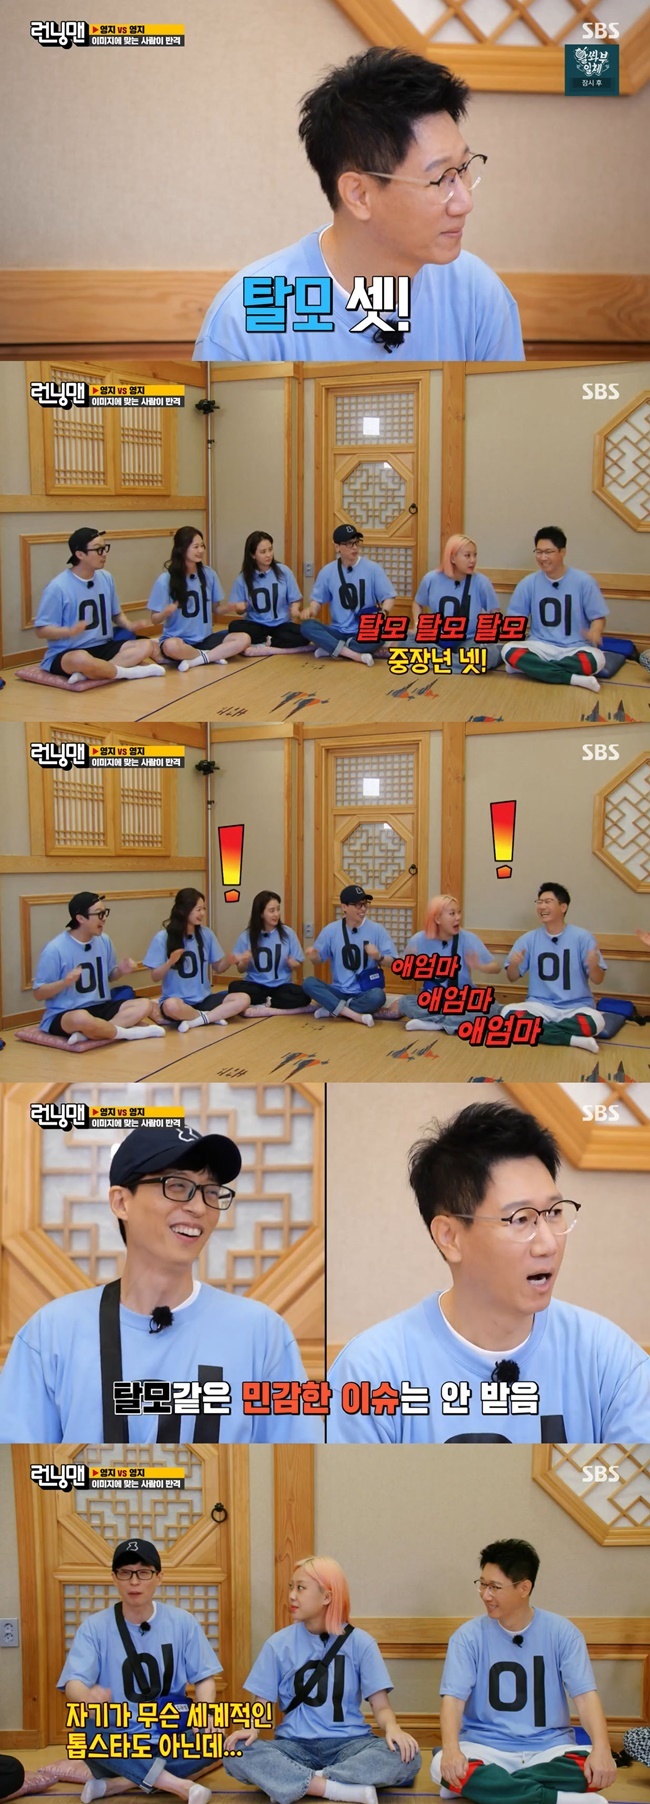 Yoo Jae-Suk pinched Ji Suk-jin who avoids Hair loss factOn SBS Running Man broadcast on August 22, the same name Lee Young-ji and Huh Young-ji were invited as guests and decorated with Gyeongji VS Gnostic Race.On this day, the members conducted Image is good as the fourth mission.I like image is the way that the attack team responds to the image and the number of the defensive team.However, all offense and defense must be done within three turns, and defense should not be duplicated.Yang Se-chan then shouted Hair loss three for Ji Suk-jin.However, Ji Suk-jin avoided looking at him as if he had not heard, and eventually the youngest Lee Young-ji received it as Hair loss Hair loss Hair loss.Also, Lee Young-ji, who was burned by the desire to win when Kim Jong Kook shouted three mothers, received mother mother mother mother mother mother and made the scene into a laughing sea.Among them, Yang Se-chan said, Seokjin is too avoiding the comment, he said. I do not accept it. I do not pretend to hear it.Yoo Jae-Suk agreed, Its a sleep-on-one loach, pretending you didnt hear it all the way.In addition, Ji Suk-jin emphasized to Lee Young-ji, Hair loss is you.Lee Young-ji responded, Then get a black chae.